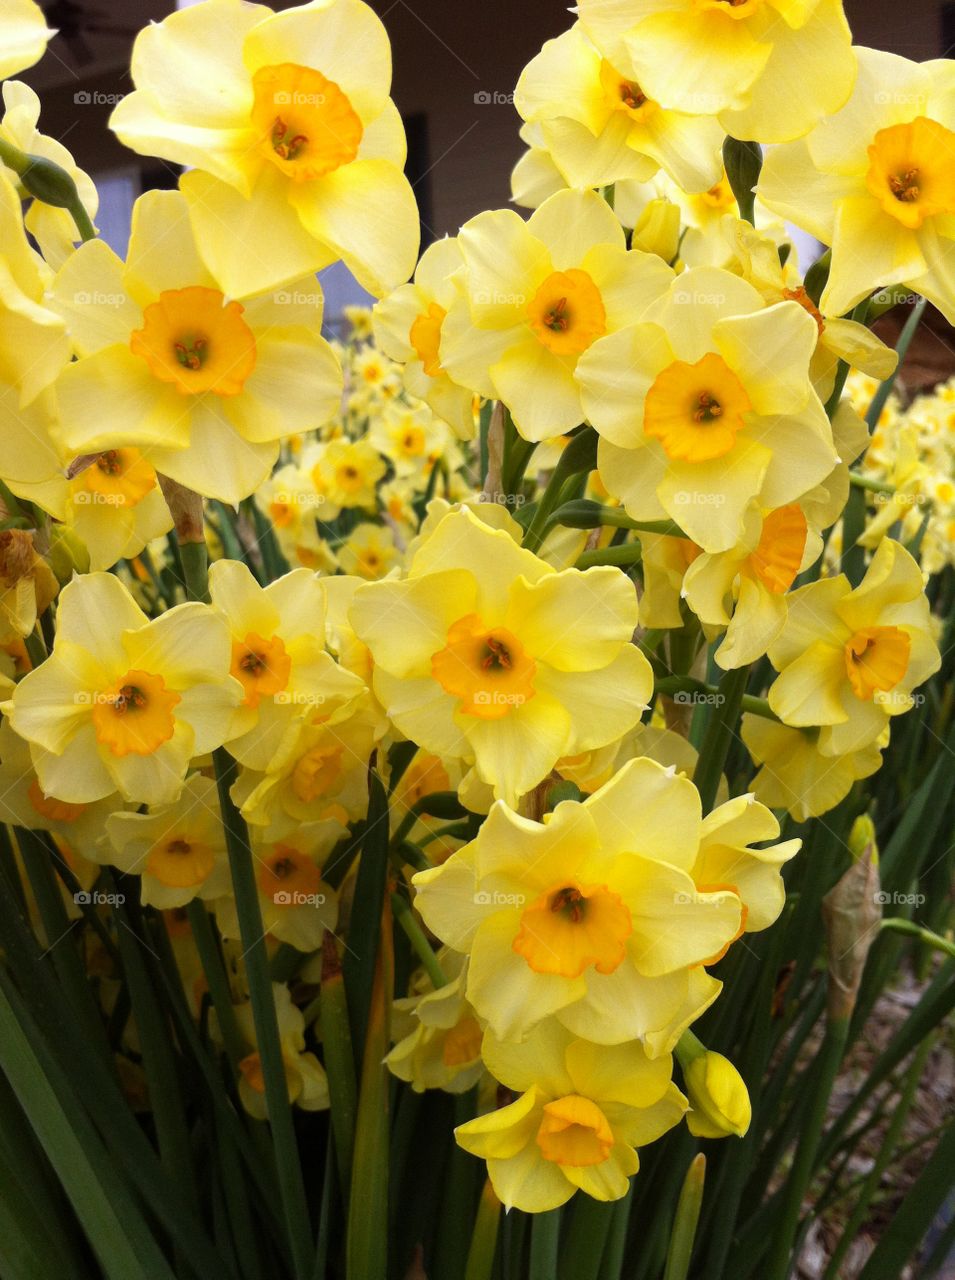 Golden daffodils, waving around in the early spring breeze, full of life and color